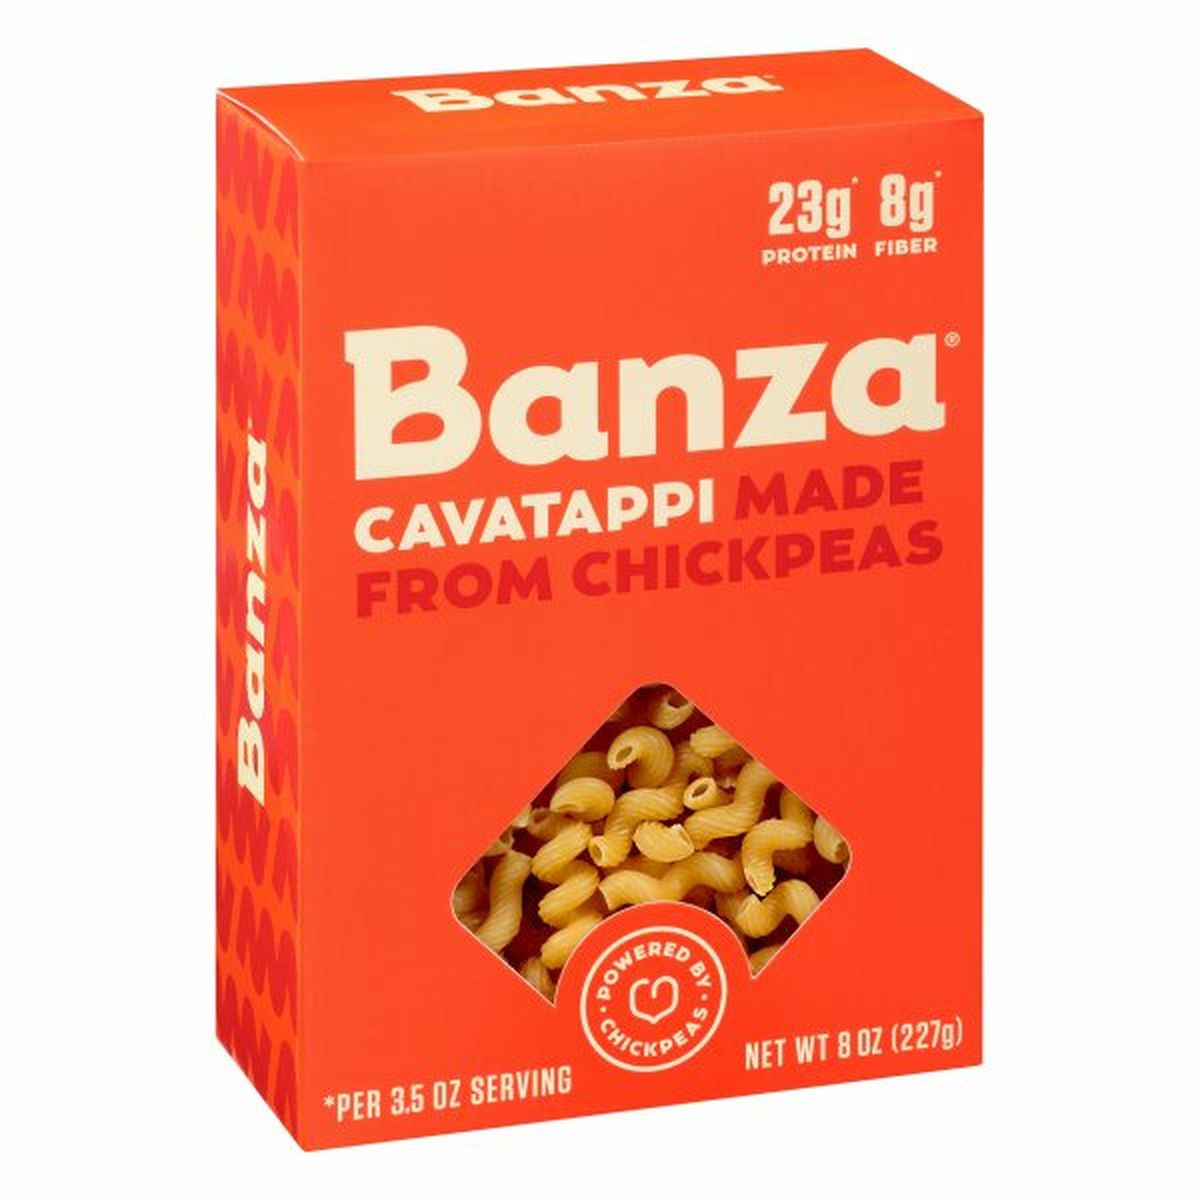 Calories in Banza Cavatappi, Made from Chickpeas